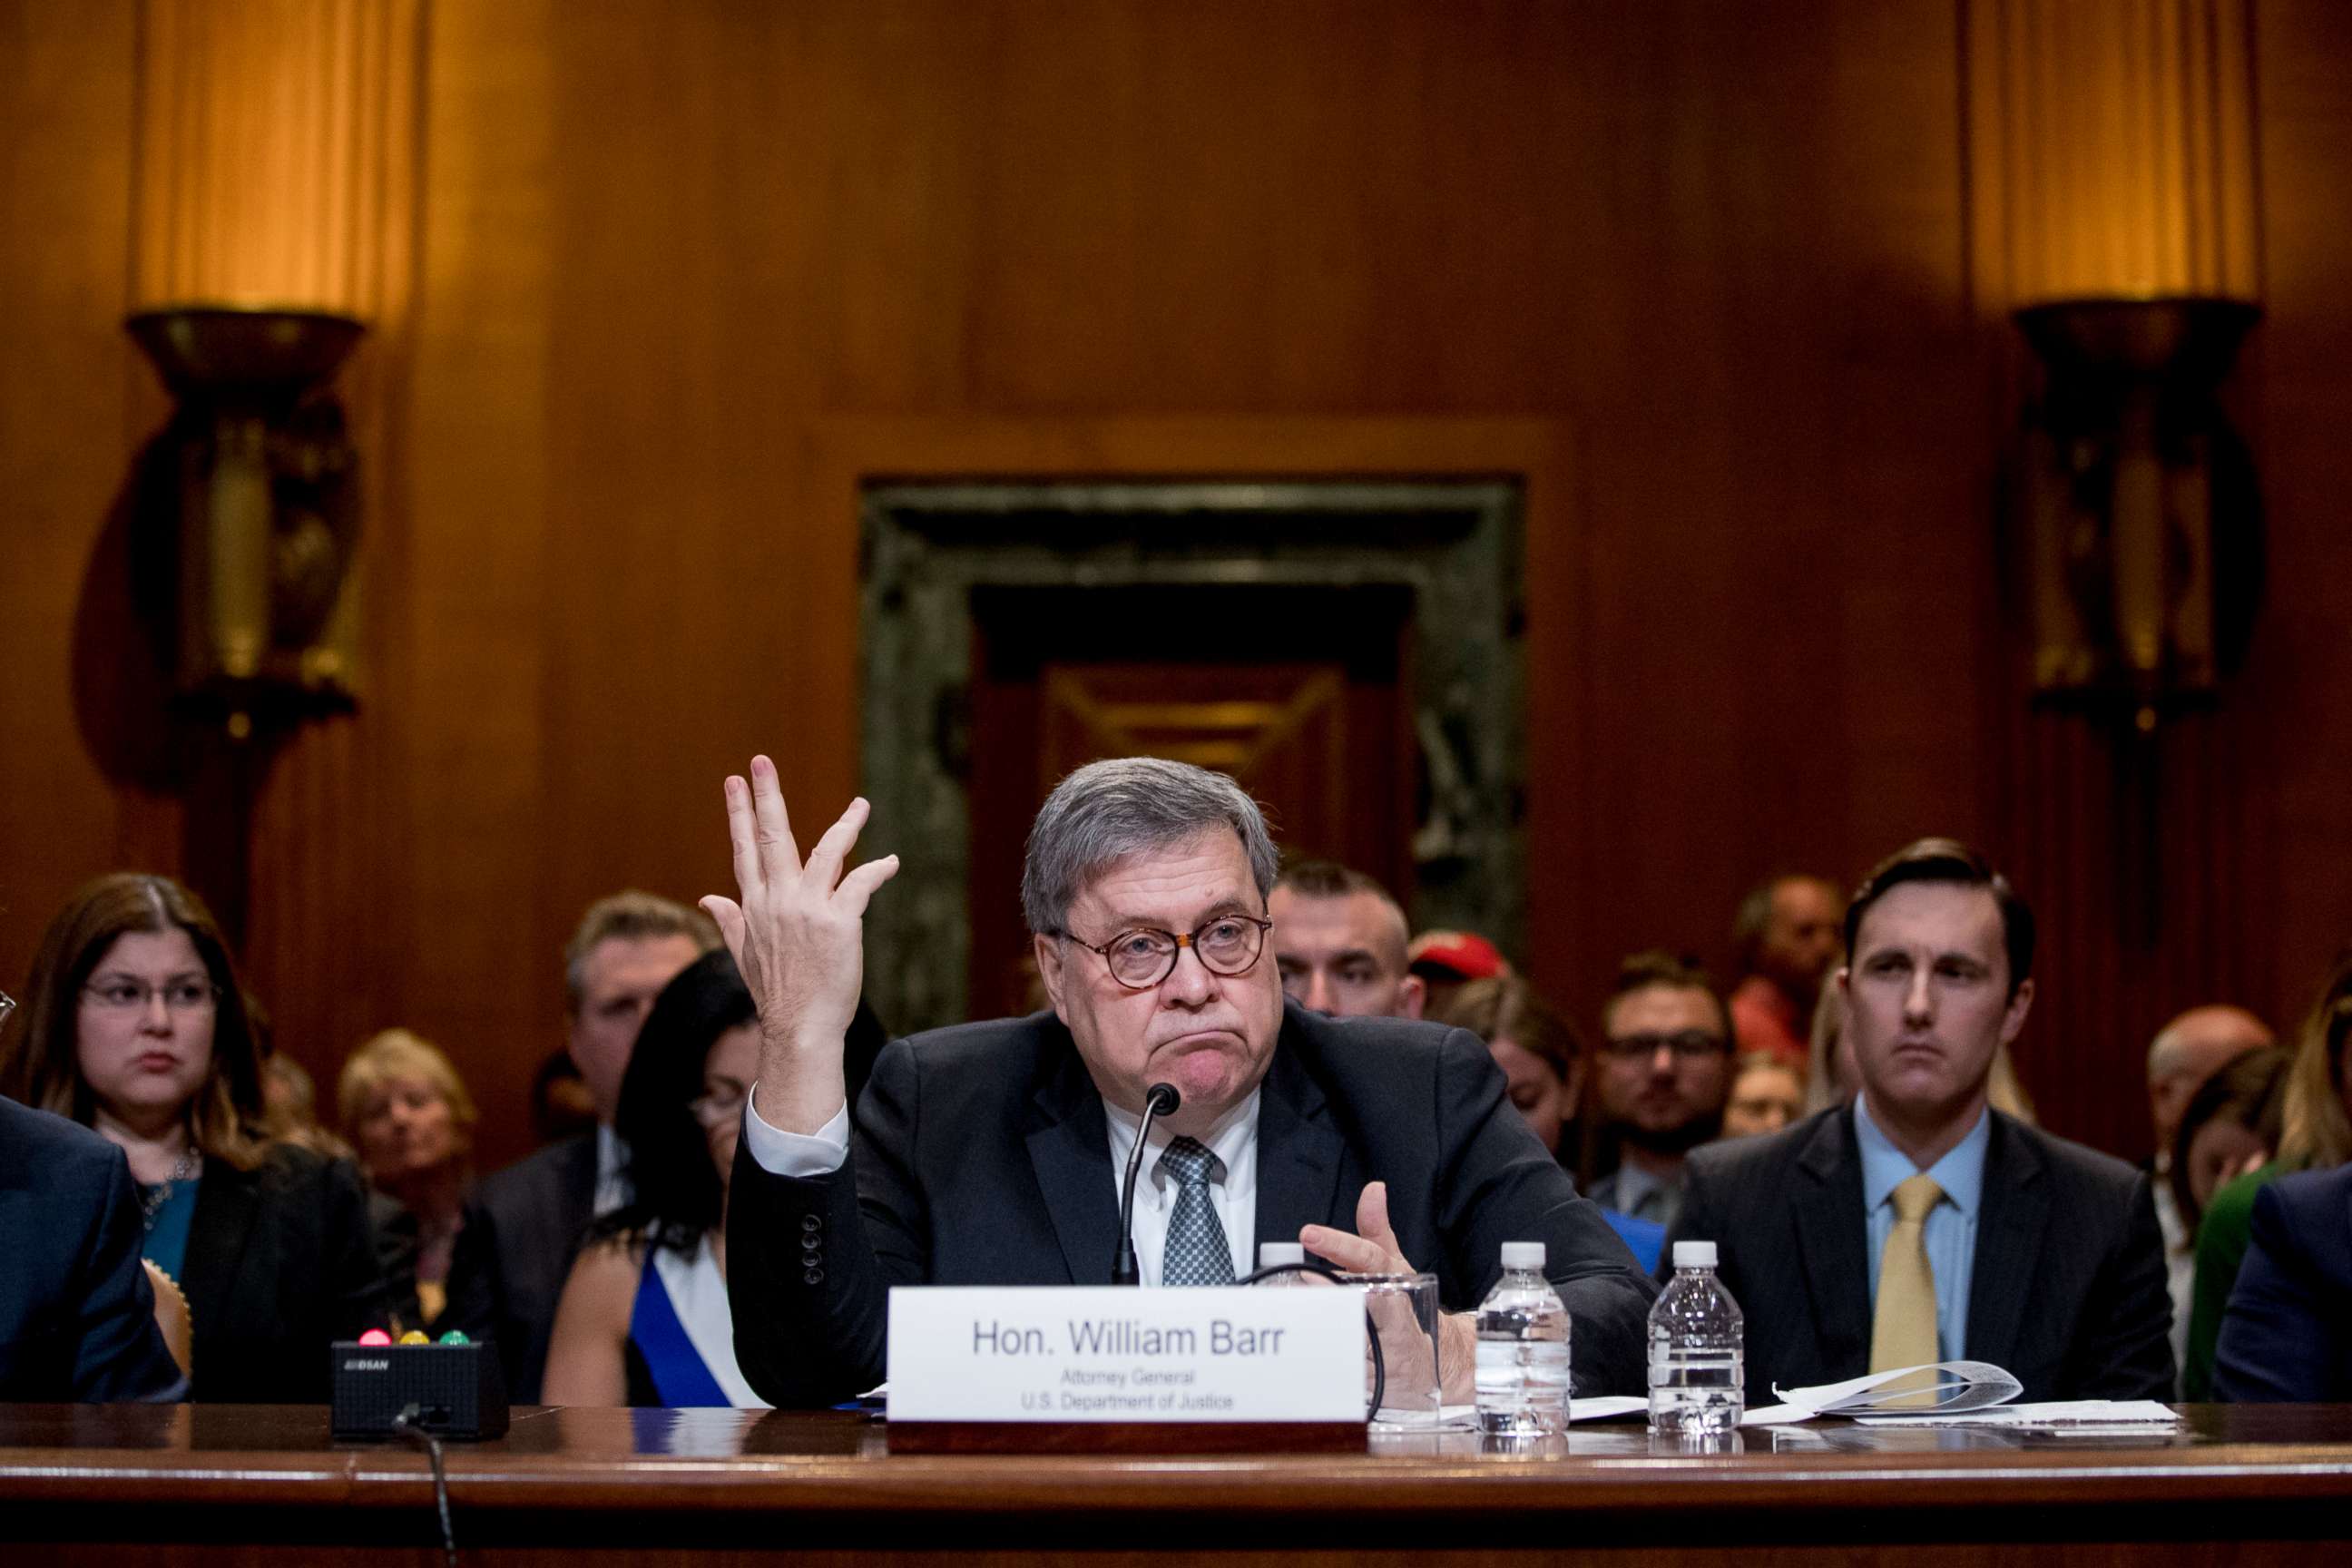 PHOTO: Attorney General William Barr gestures as he appears before a Senate Appropriations subcommittee to make his Justice Department budget request, April 10, 2019, in Washington.